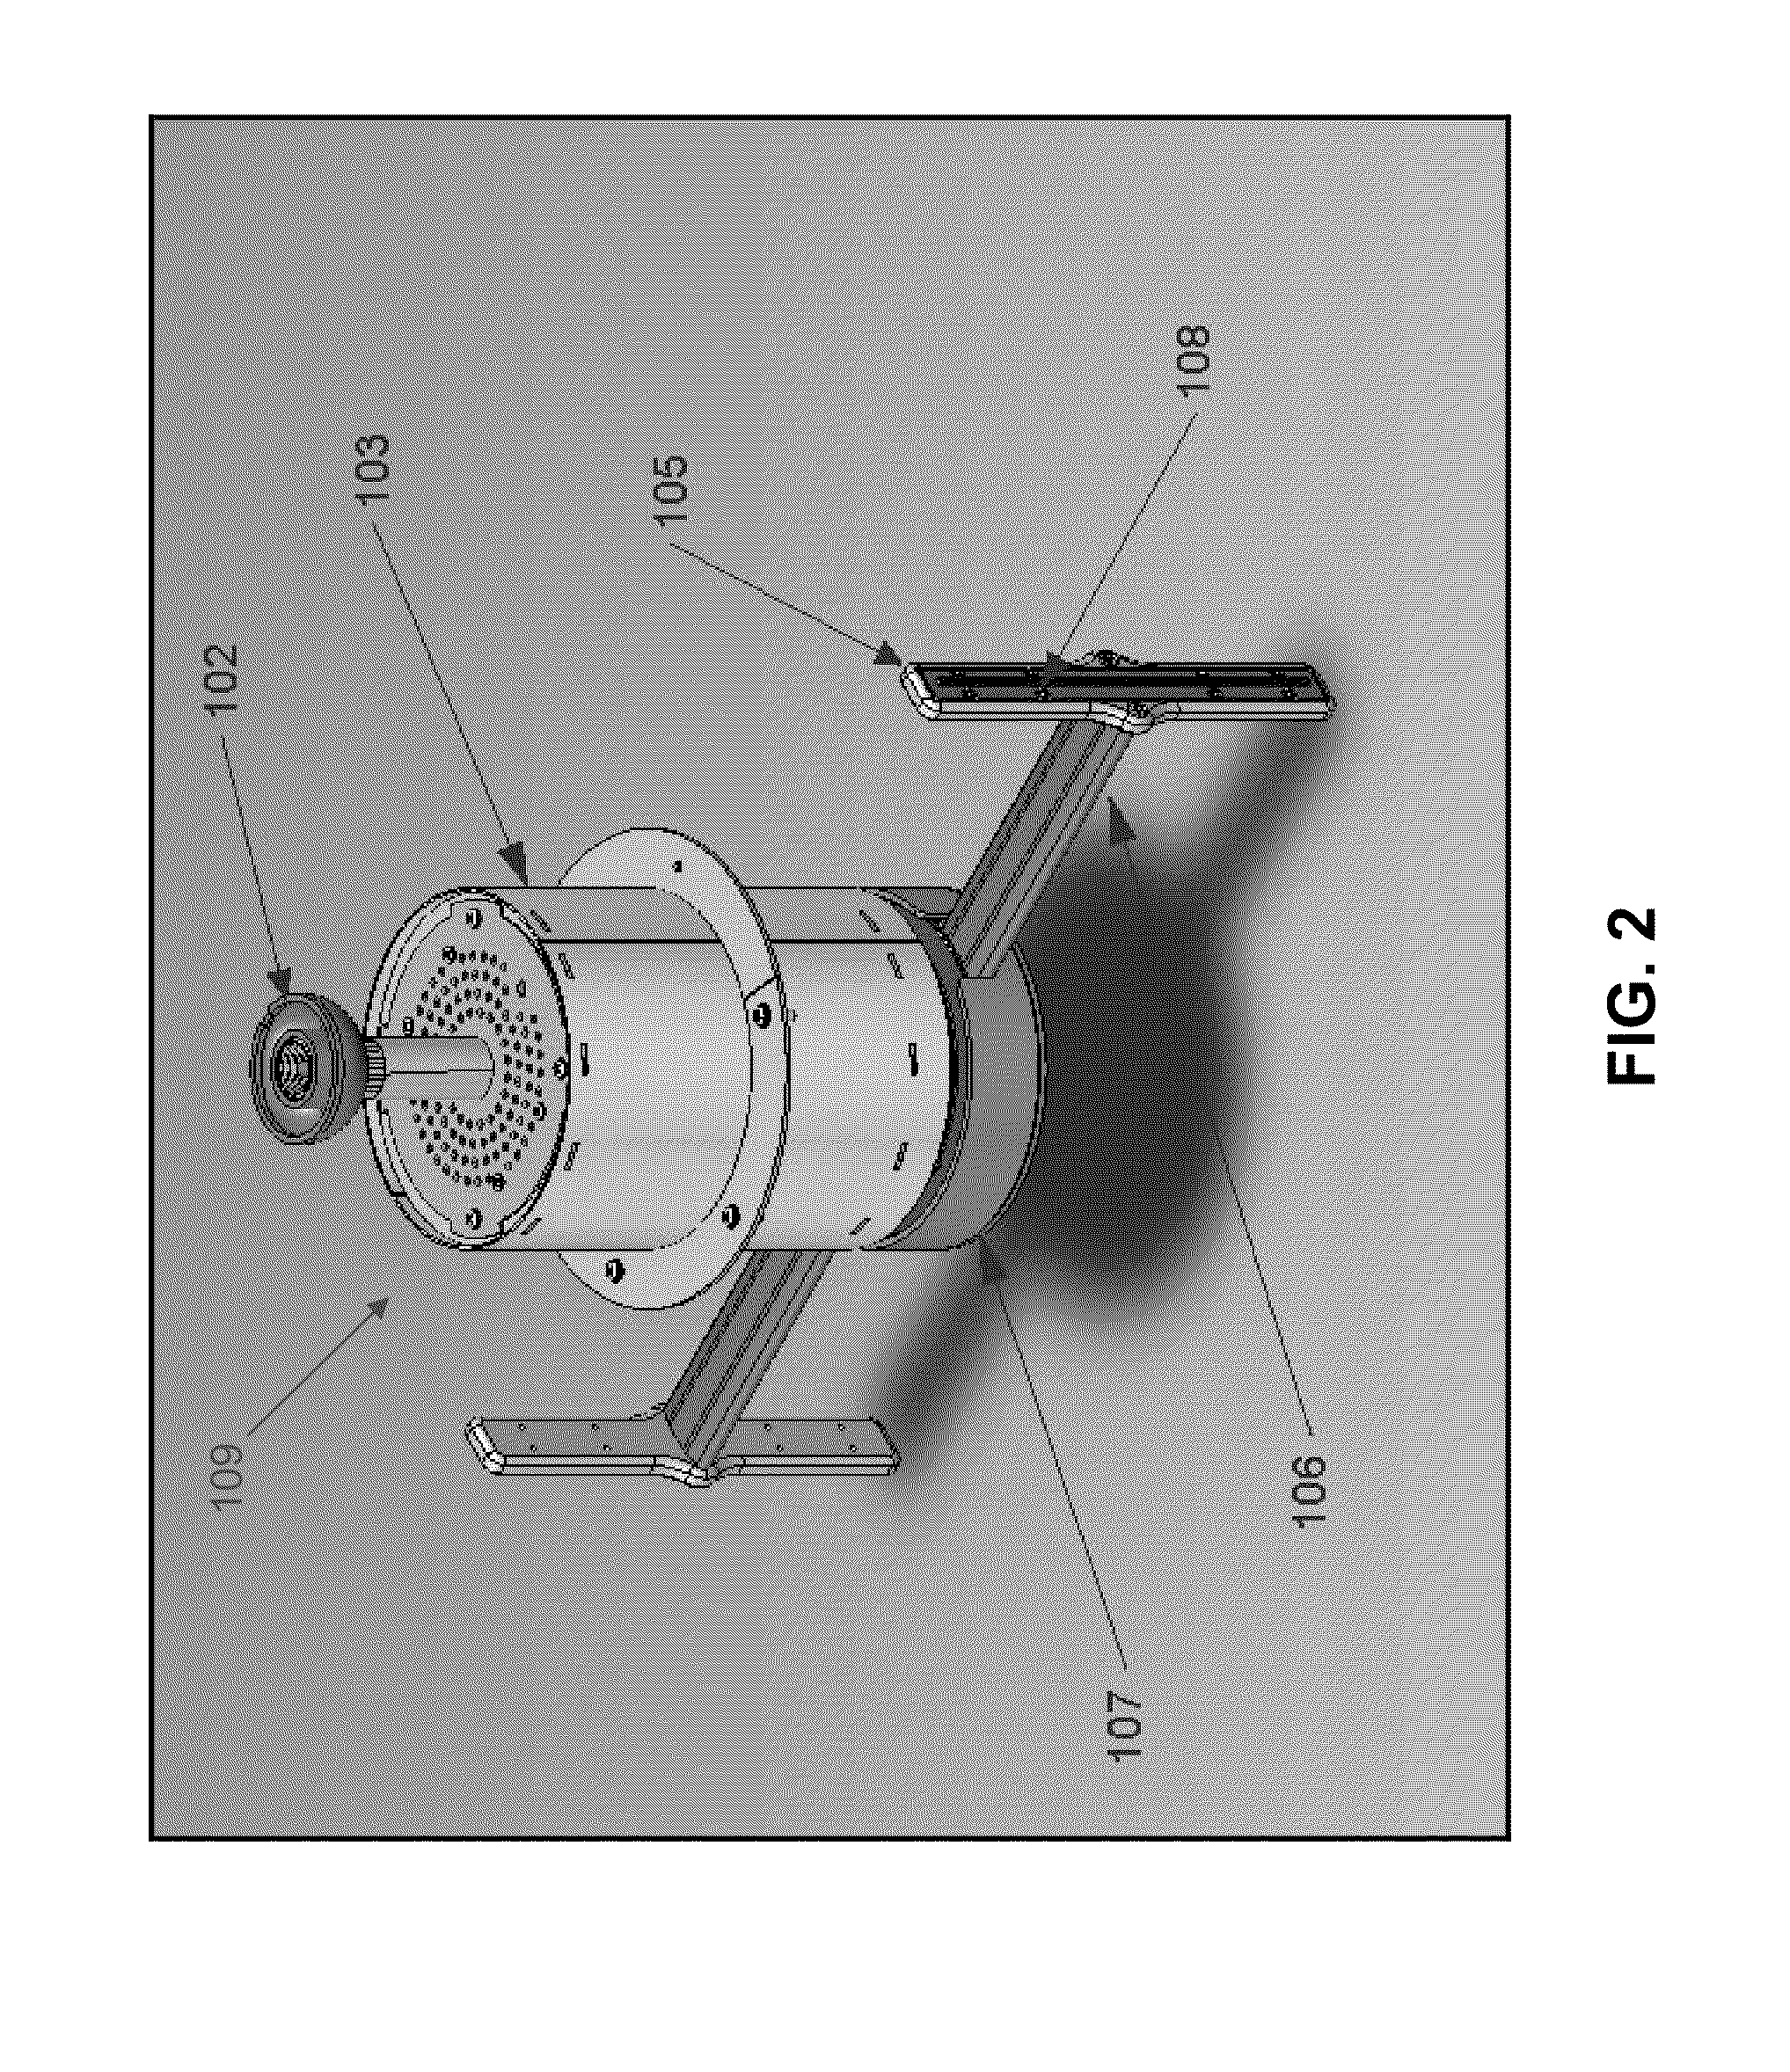 Method and apparatus for displaying digital data